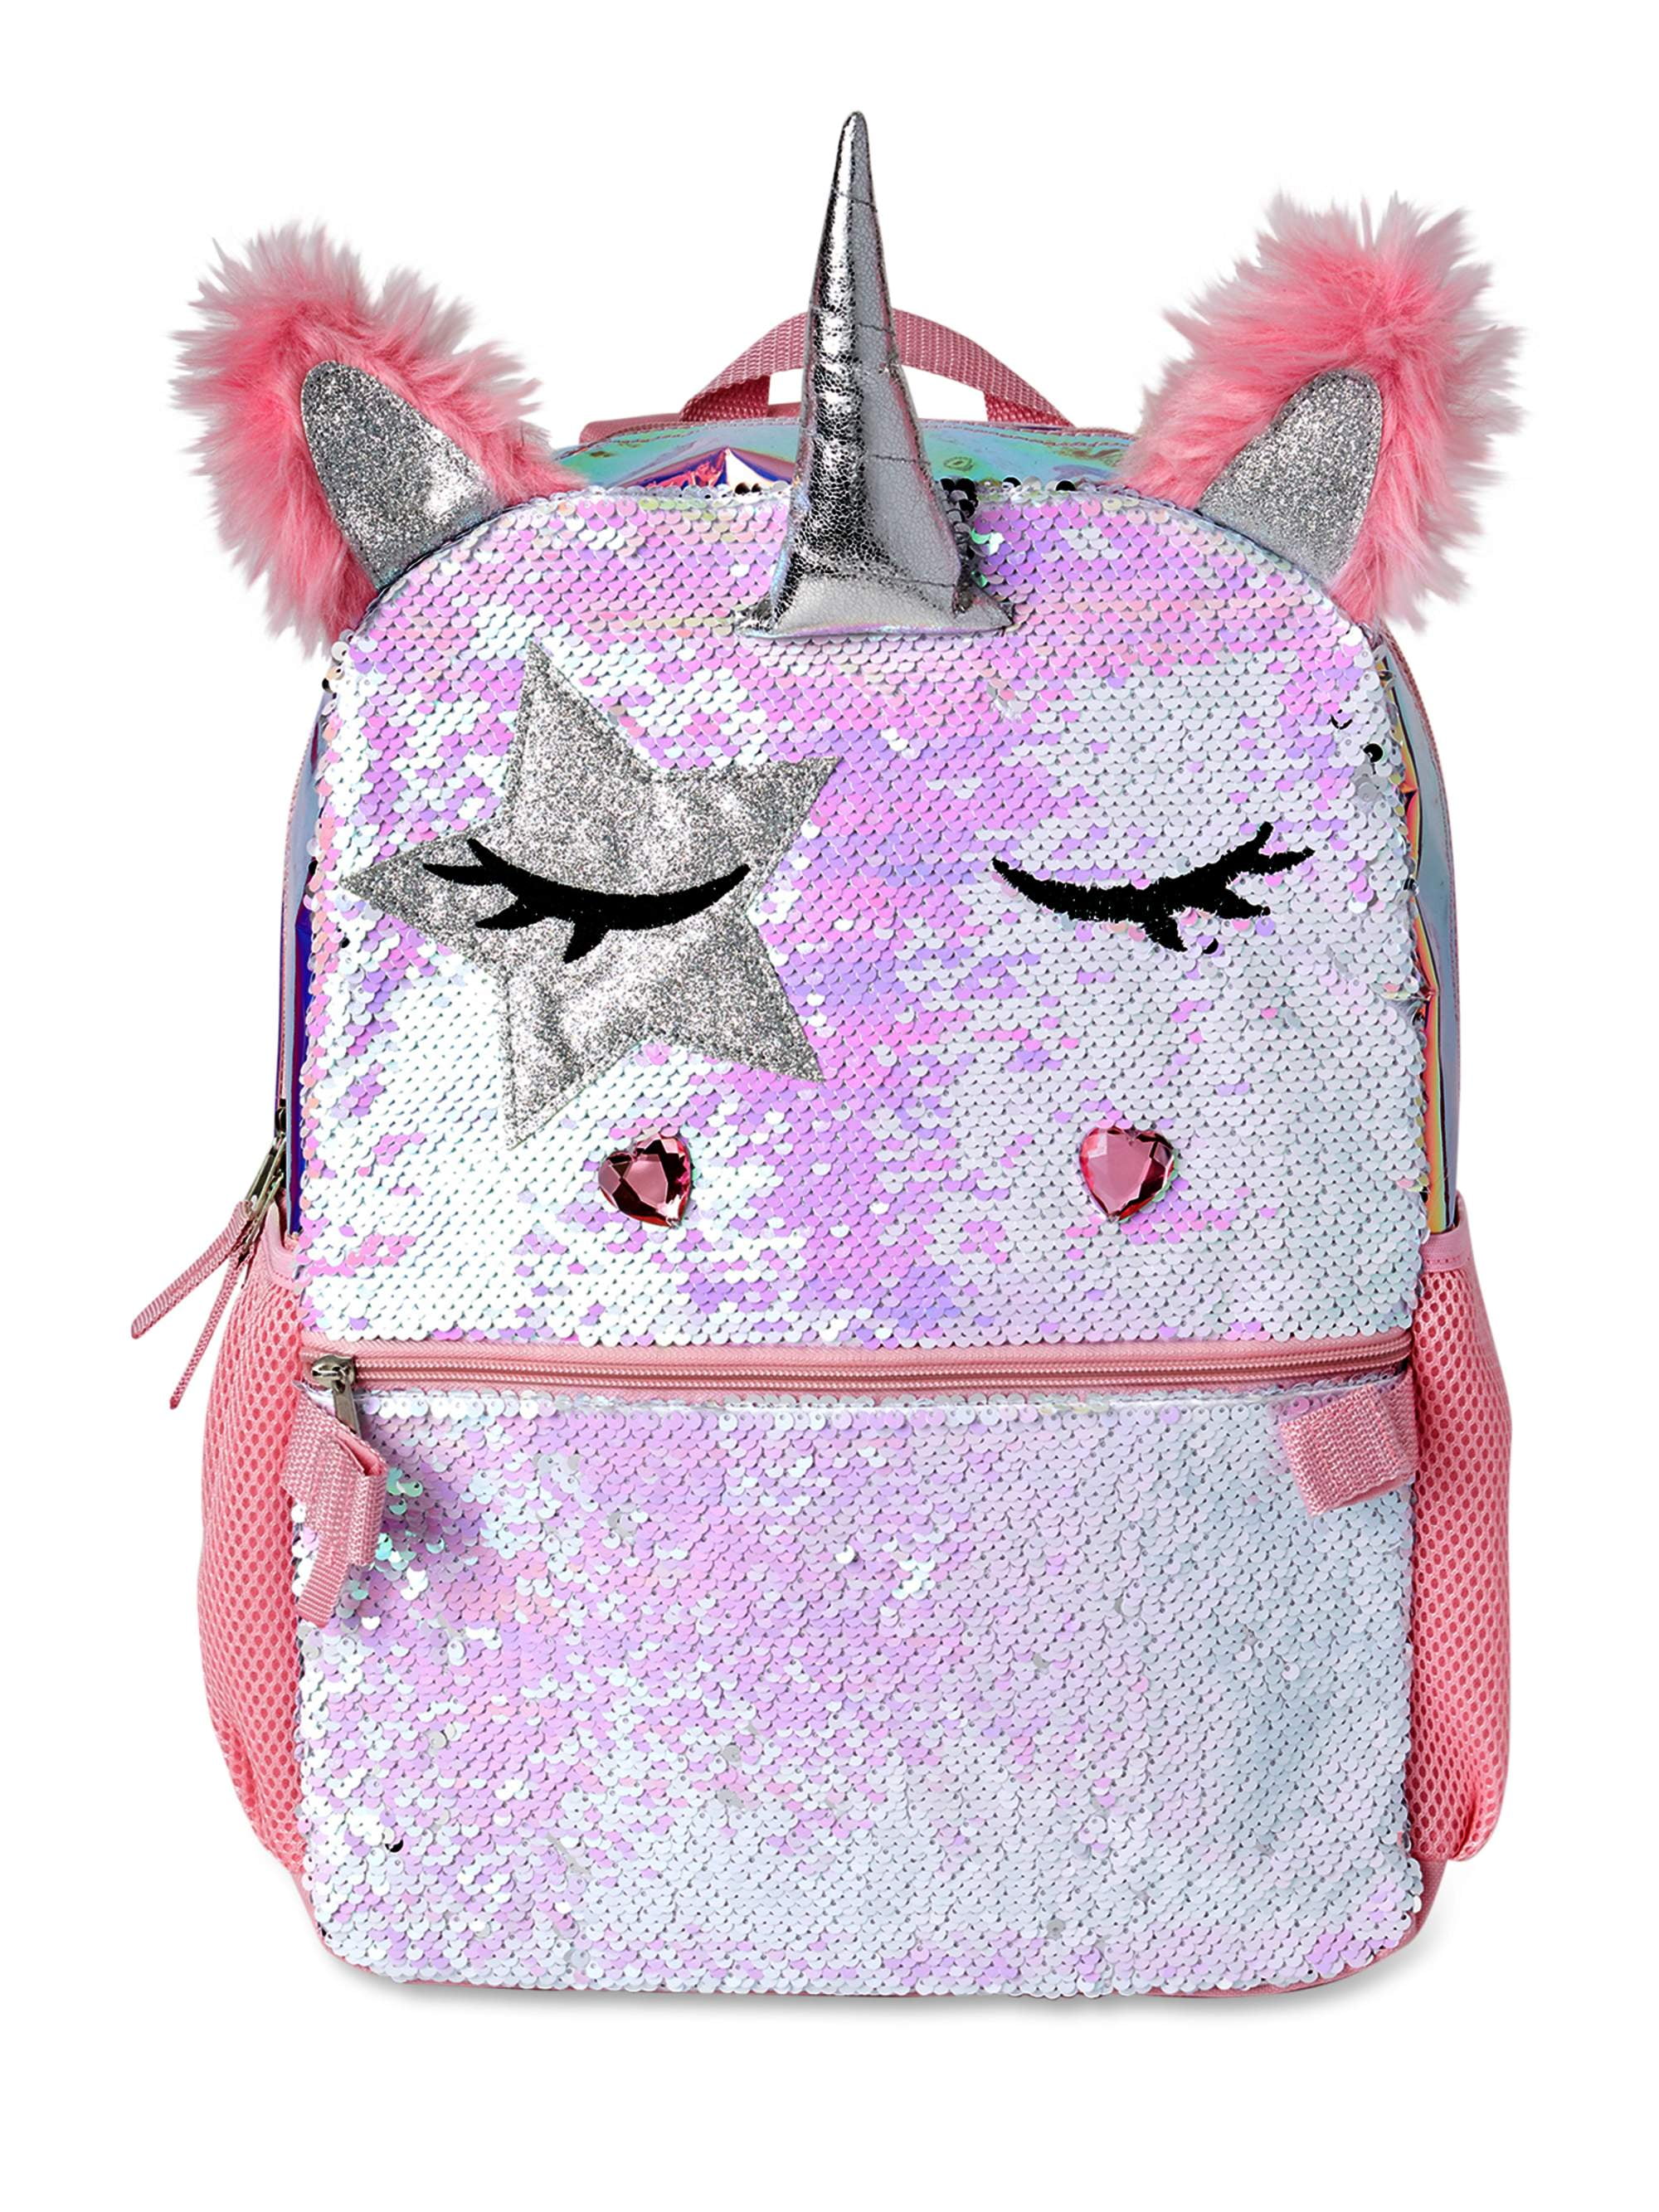 16”Sequin Bookbag and Lunch Box Unicorn Backpack for Girls 